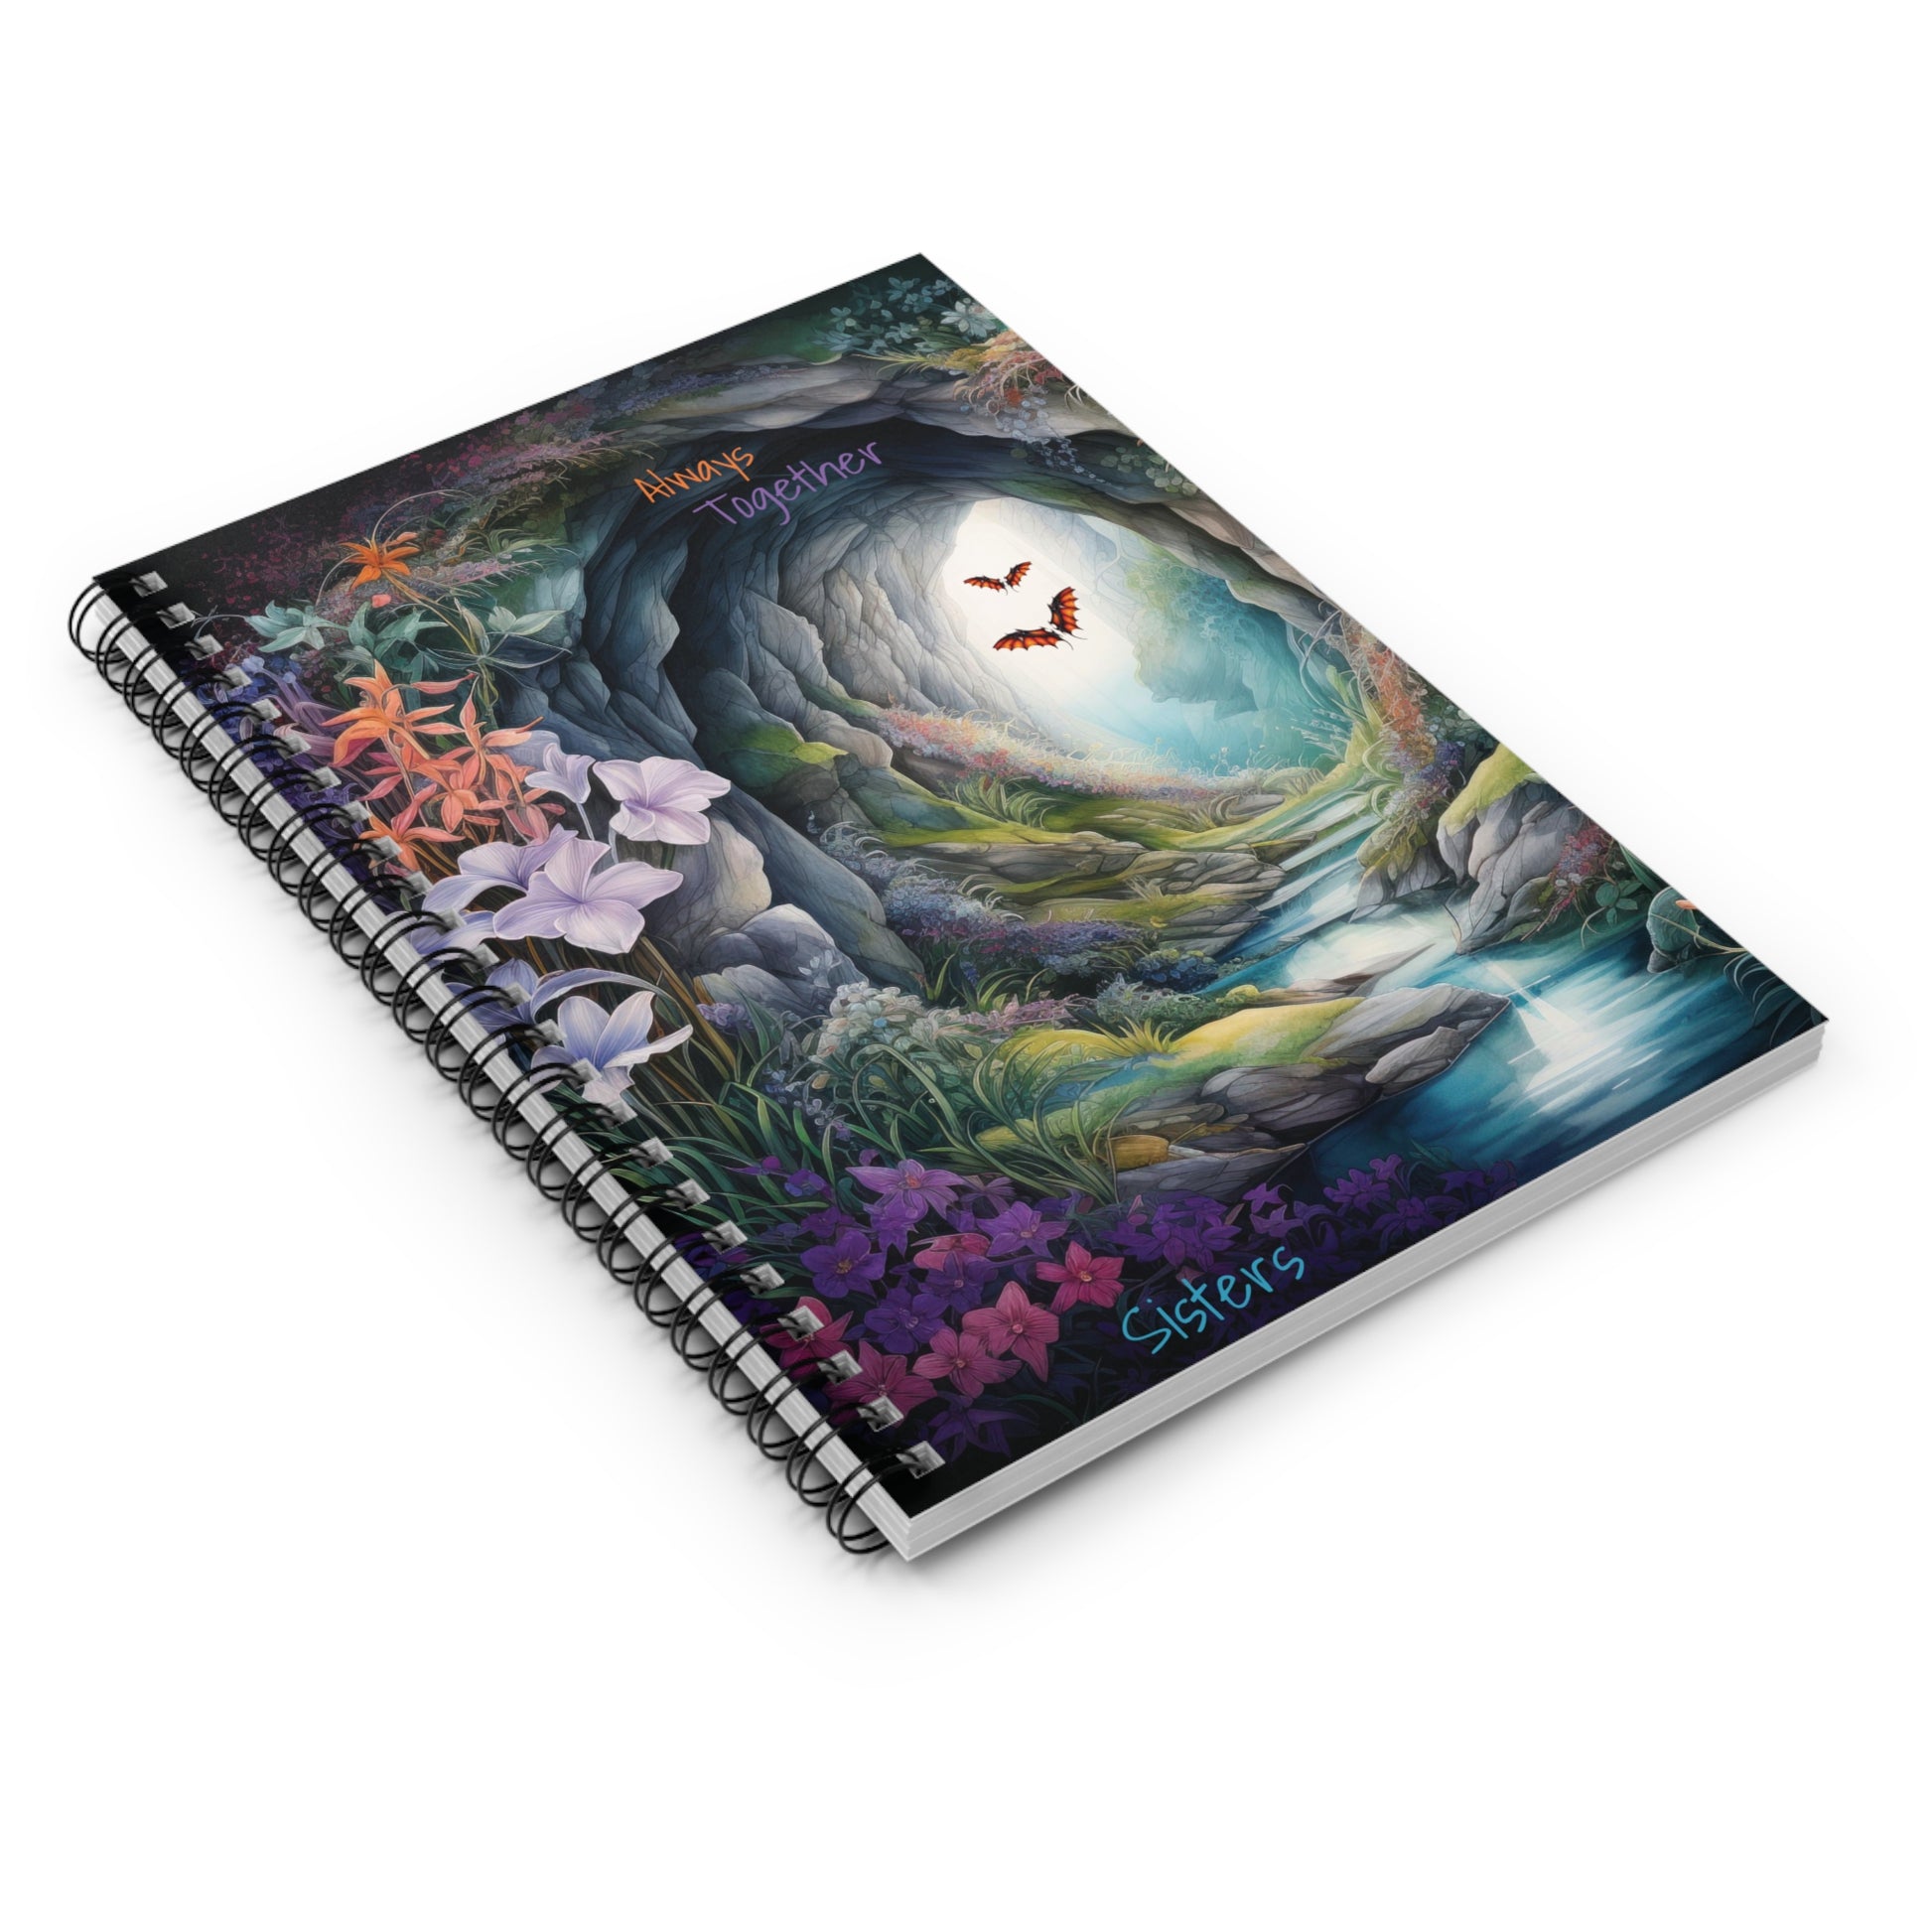 Always Together Sisters is the text on a front cover design on a spiral notebook - a blue cave beacons to you with a stream leading in flowers surround the cave entrance the cave leads into another realm?